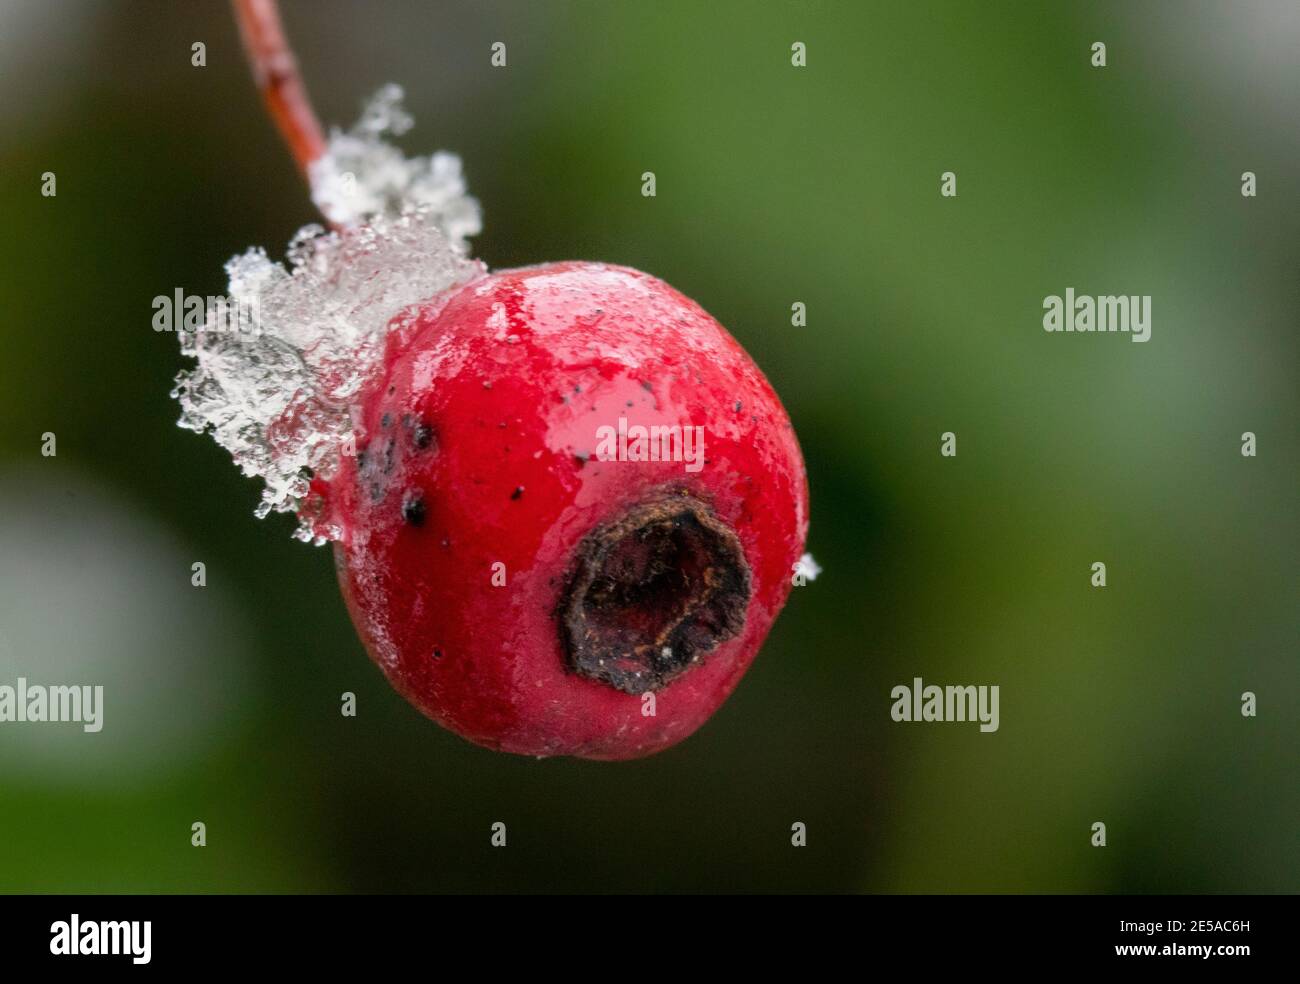 Winter landscapes, snow, ice, twigs, droplets Stock Photo